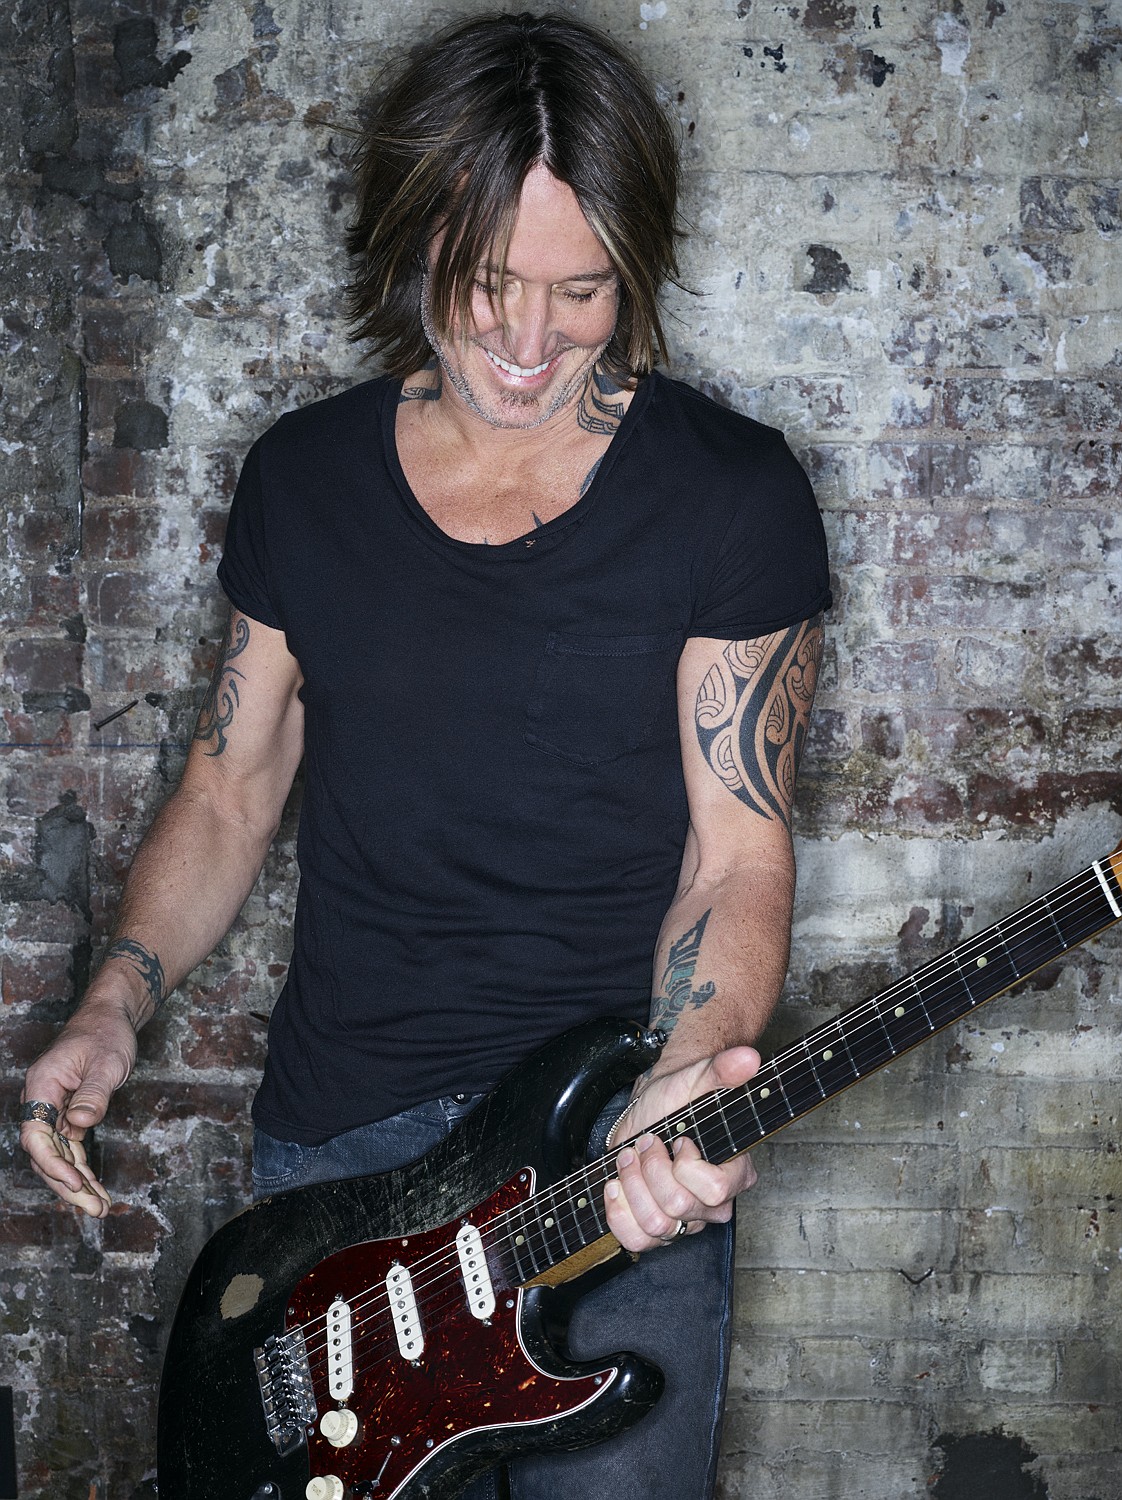 Keith Urban will be one of the headliners at  this year’s Watershed Festival July 31-Aug. 2.